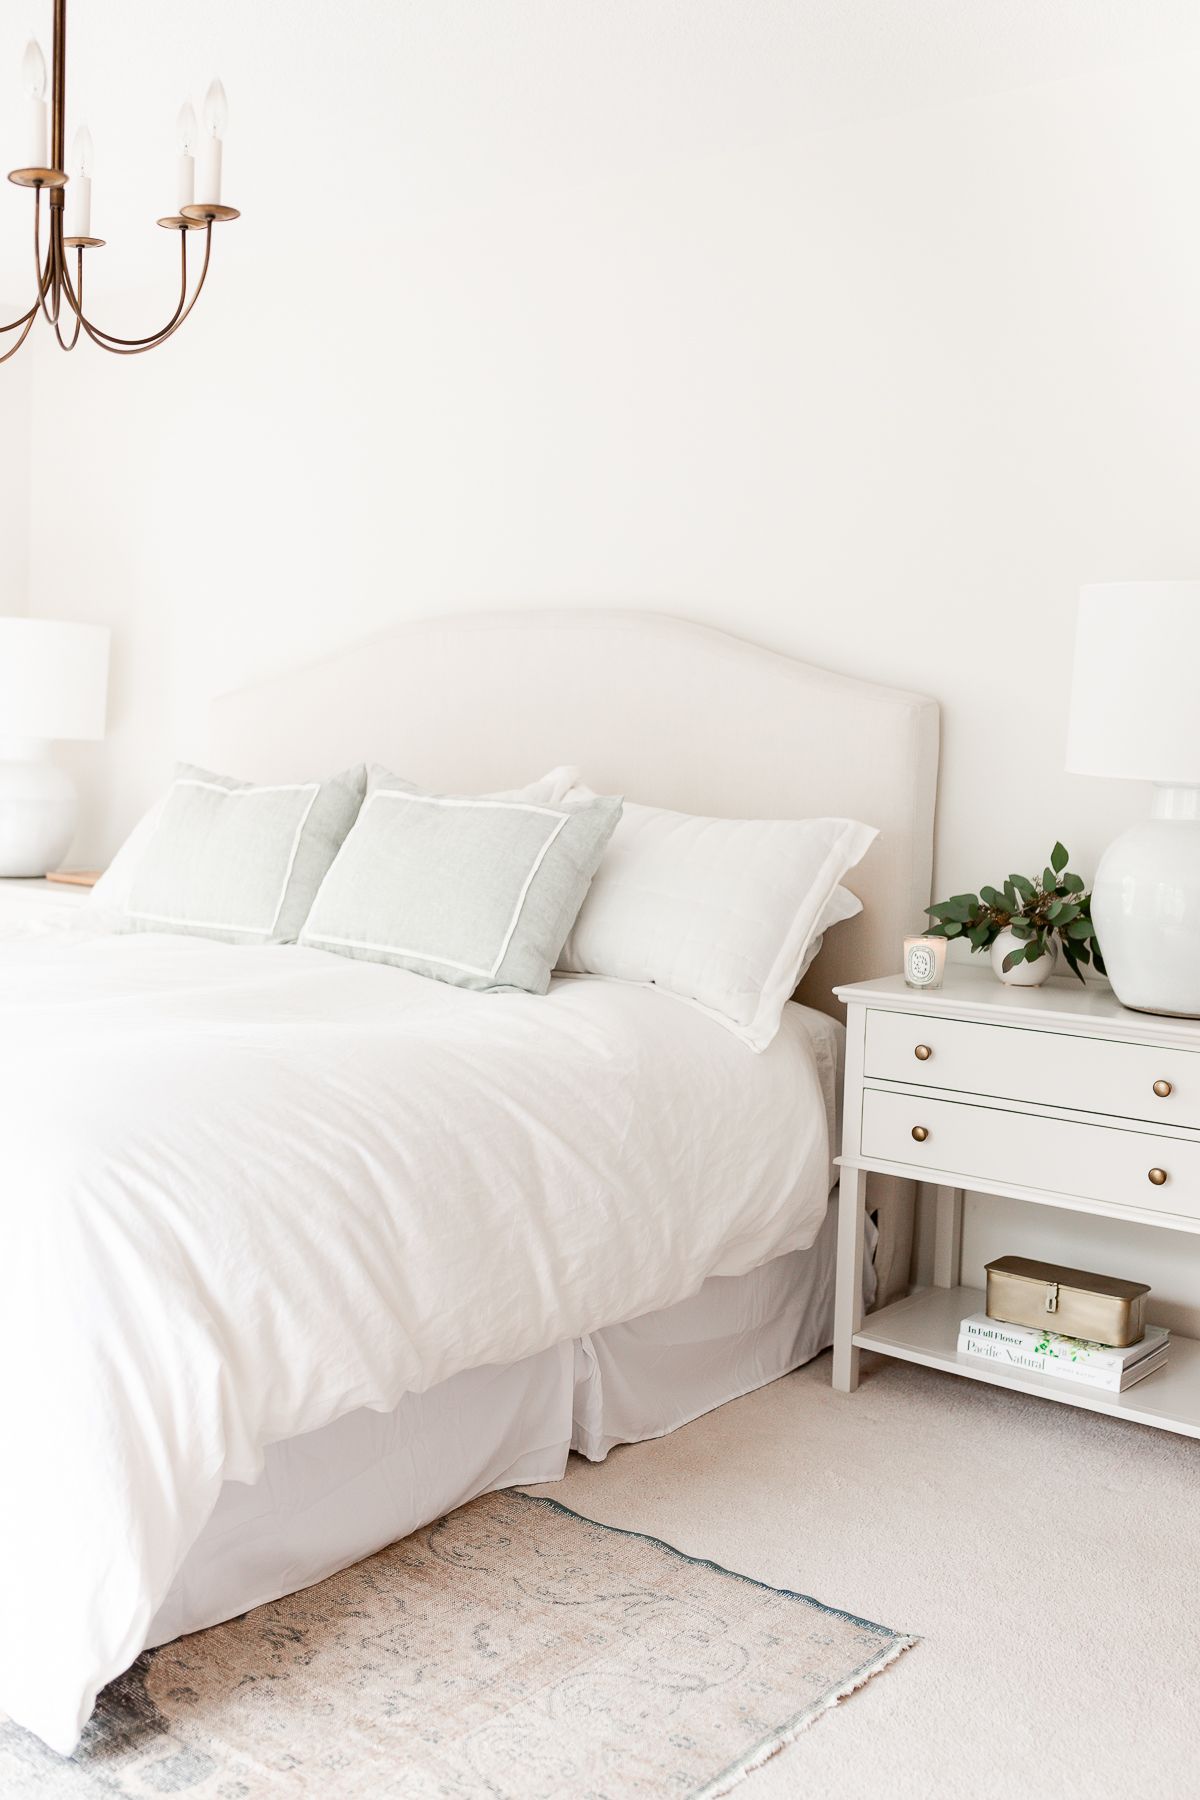 A romantic bedroom color of warm white on the walls